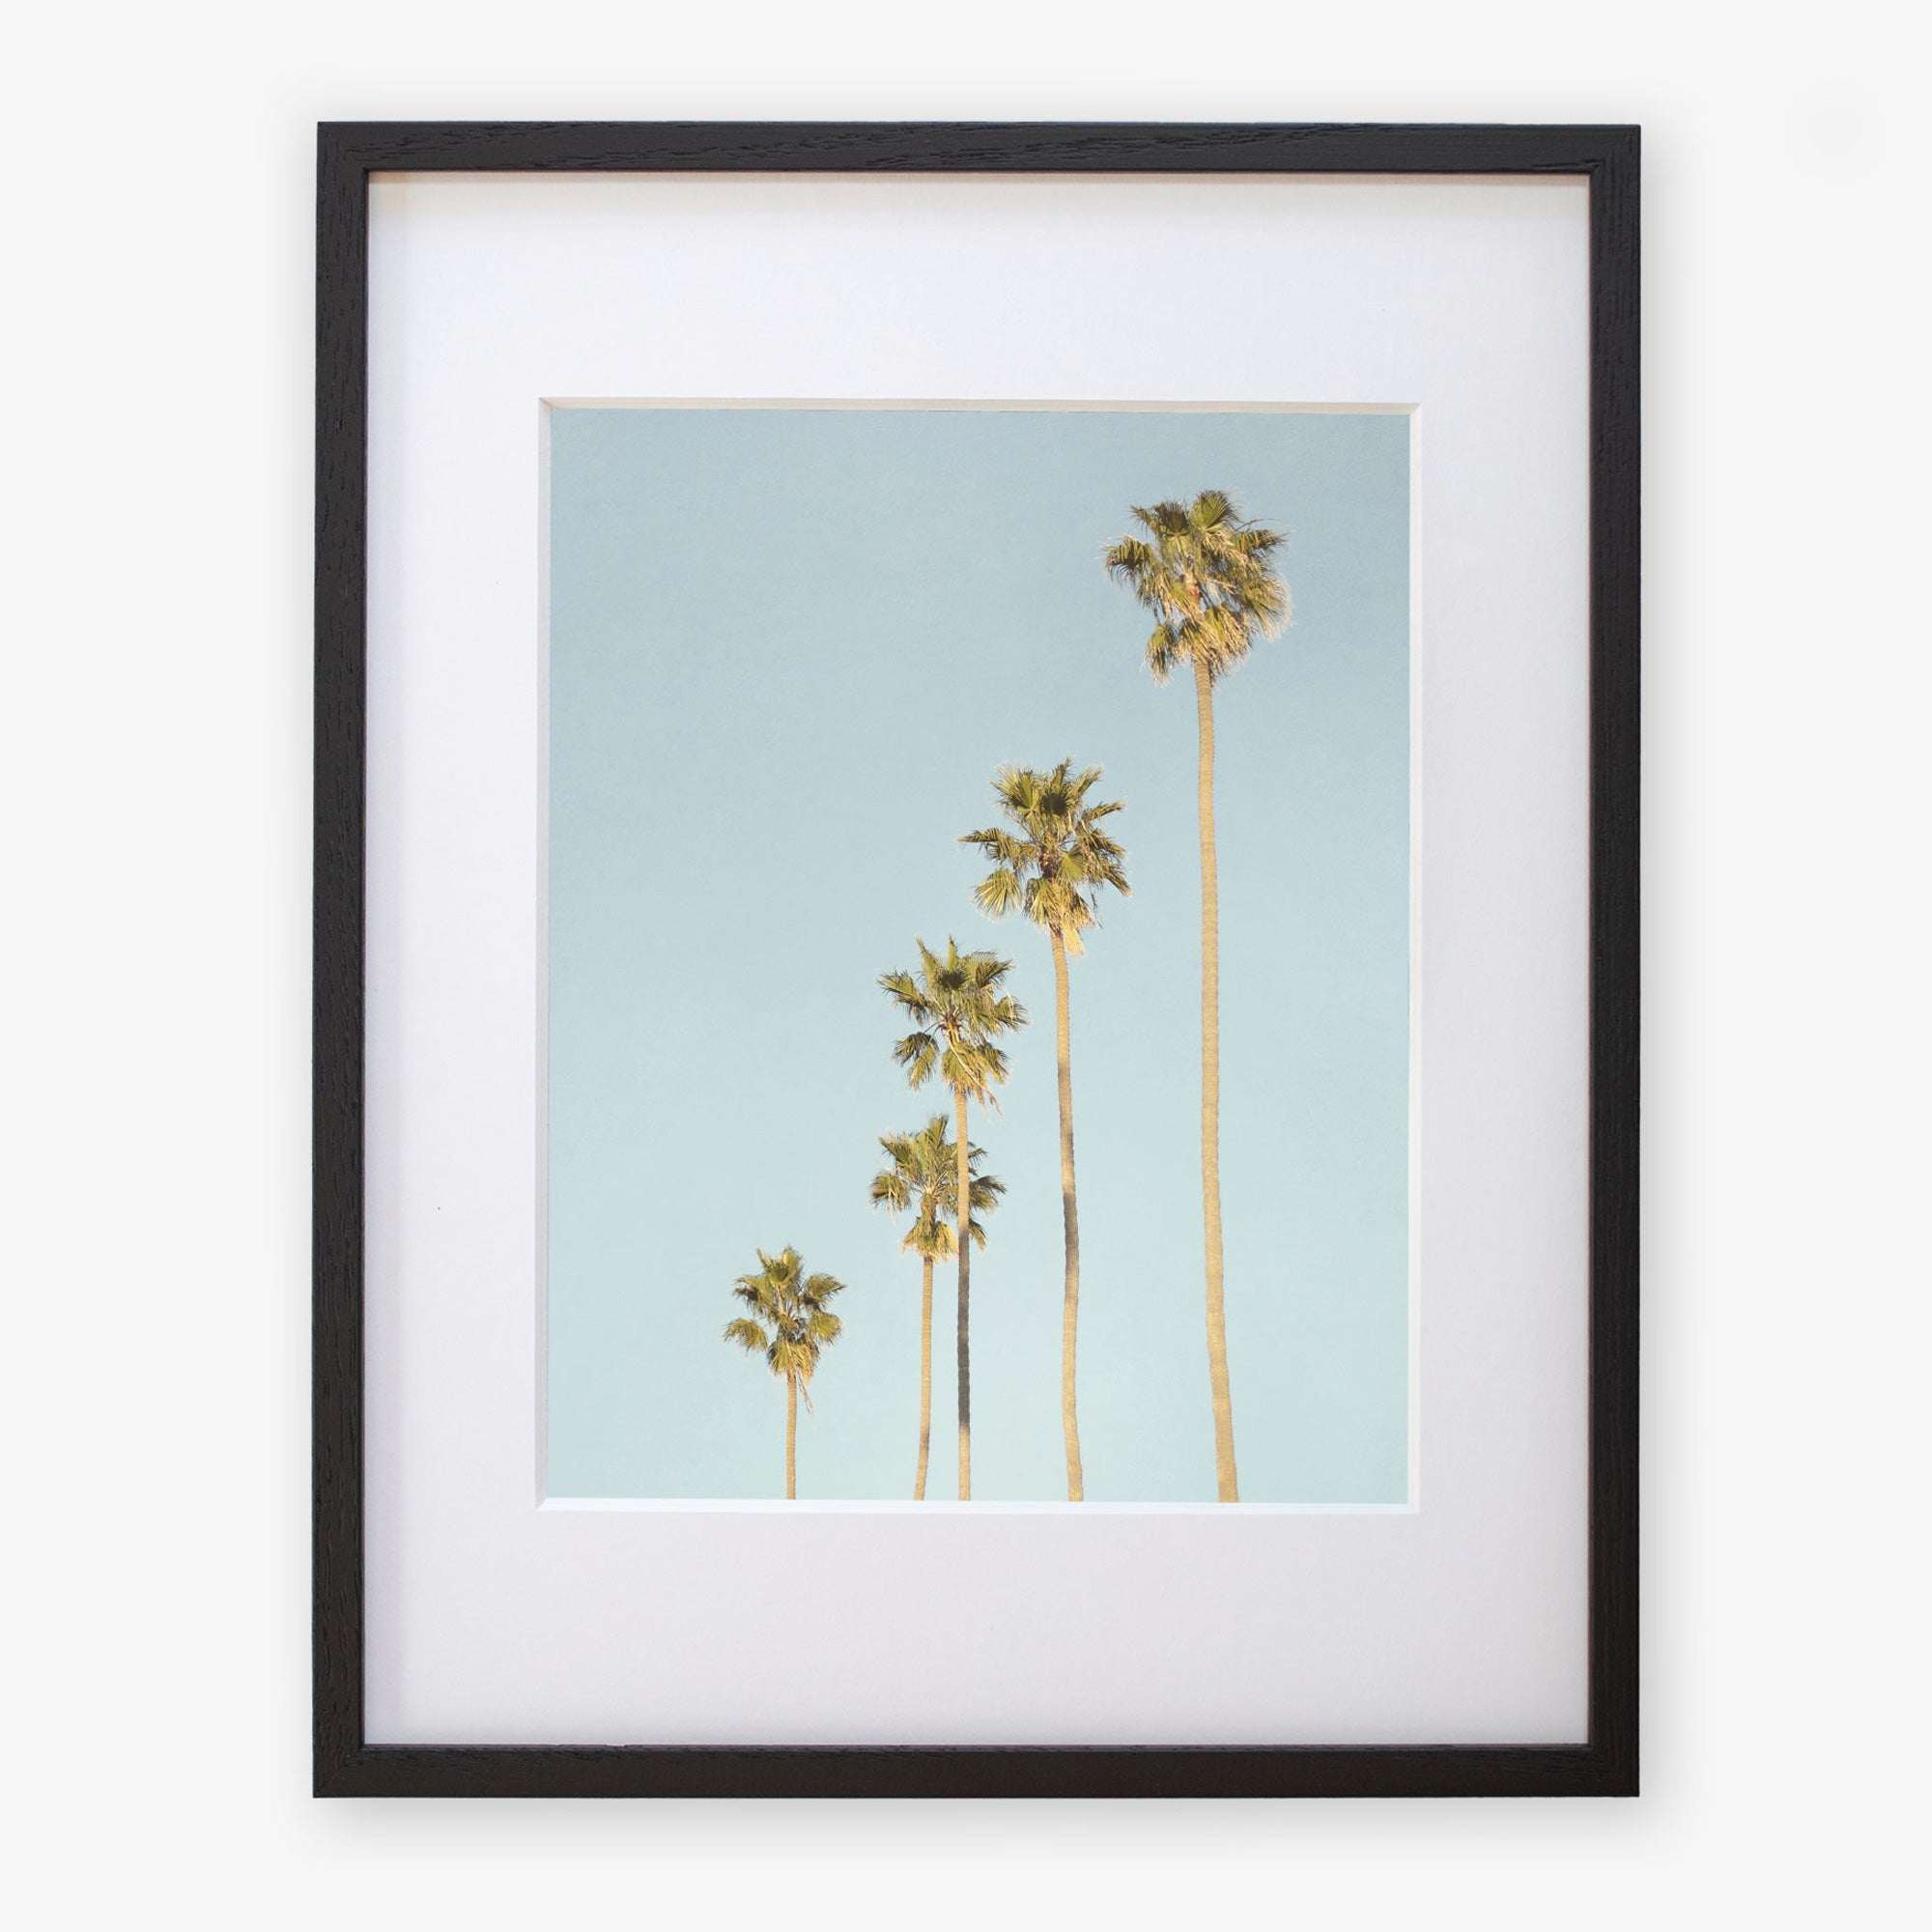 A framed Offley Green &#39;Palm Tree Steps&#39; photographic print featuring six tall palm trees against a clear blue sky, displayed within a black frame with a white mat.